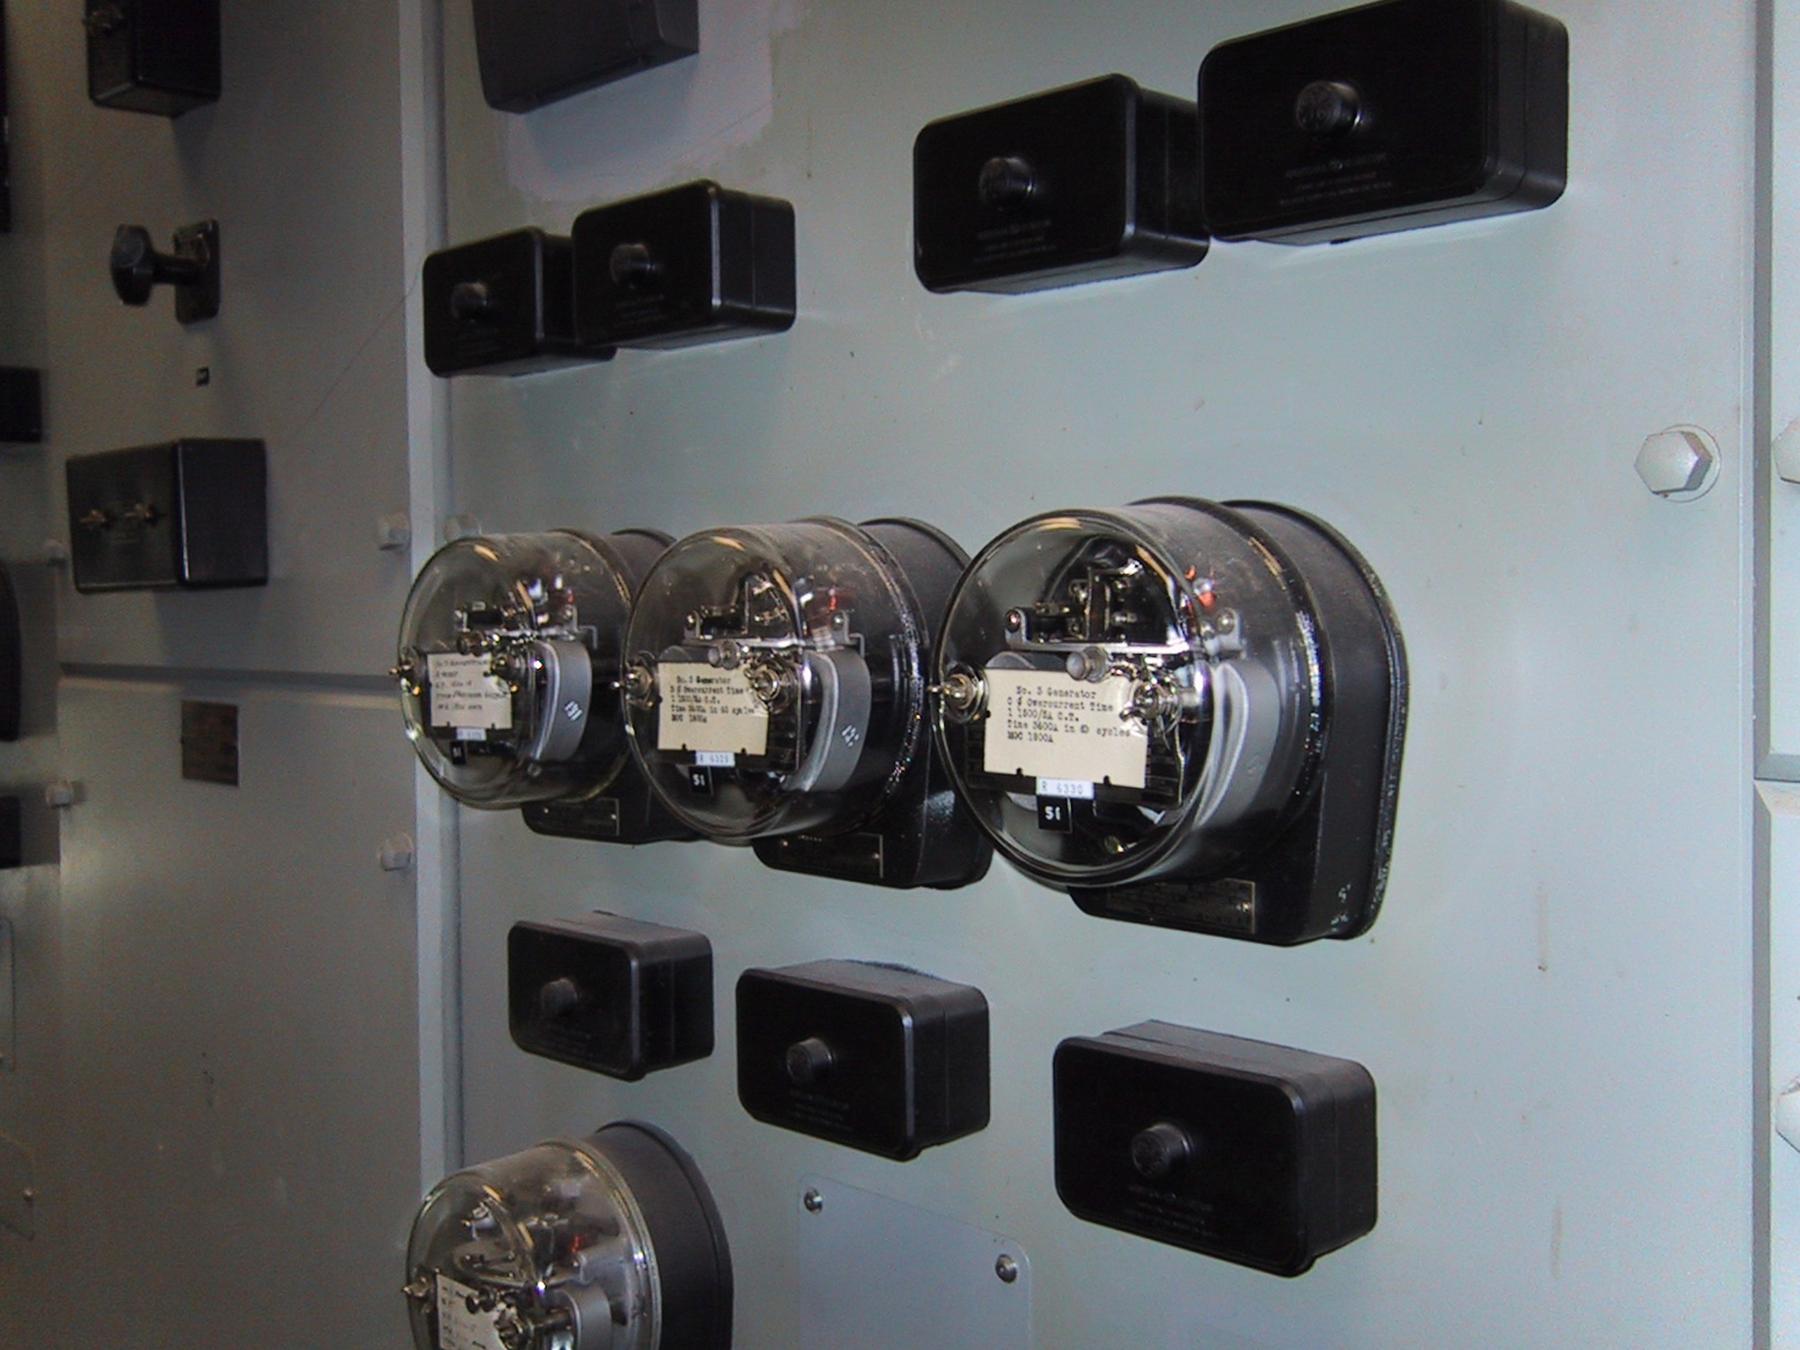 Protective Relays Hydroelectric Station - a bunch of black and white electrical equipment